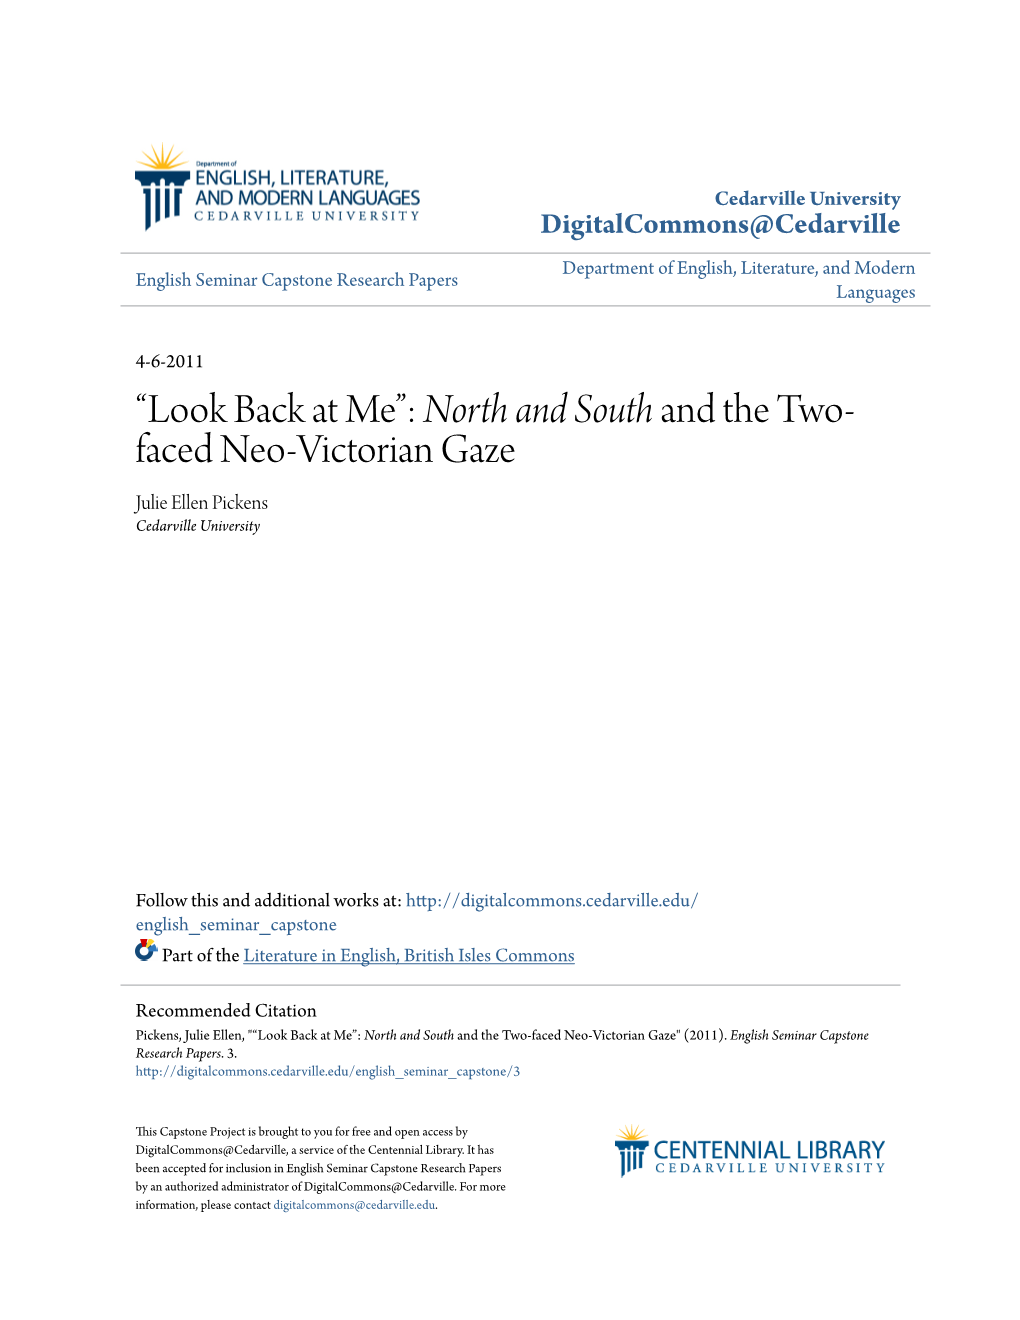 North and South and the Two-Faced Neo-Victorian Gaze" (2011)